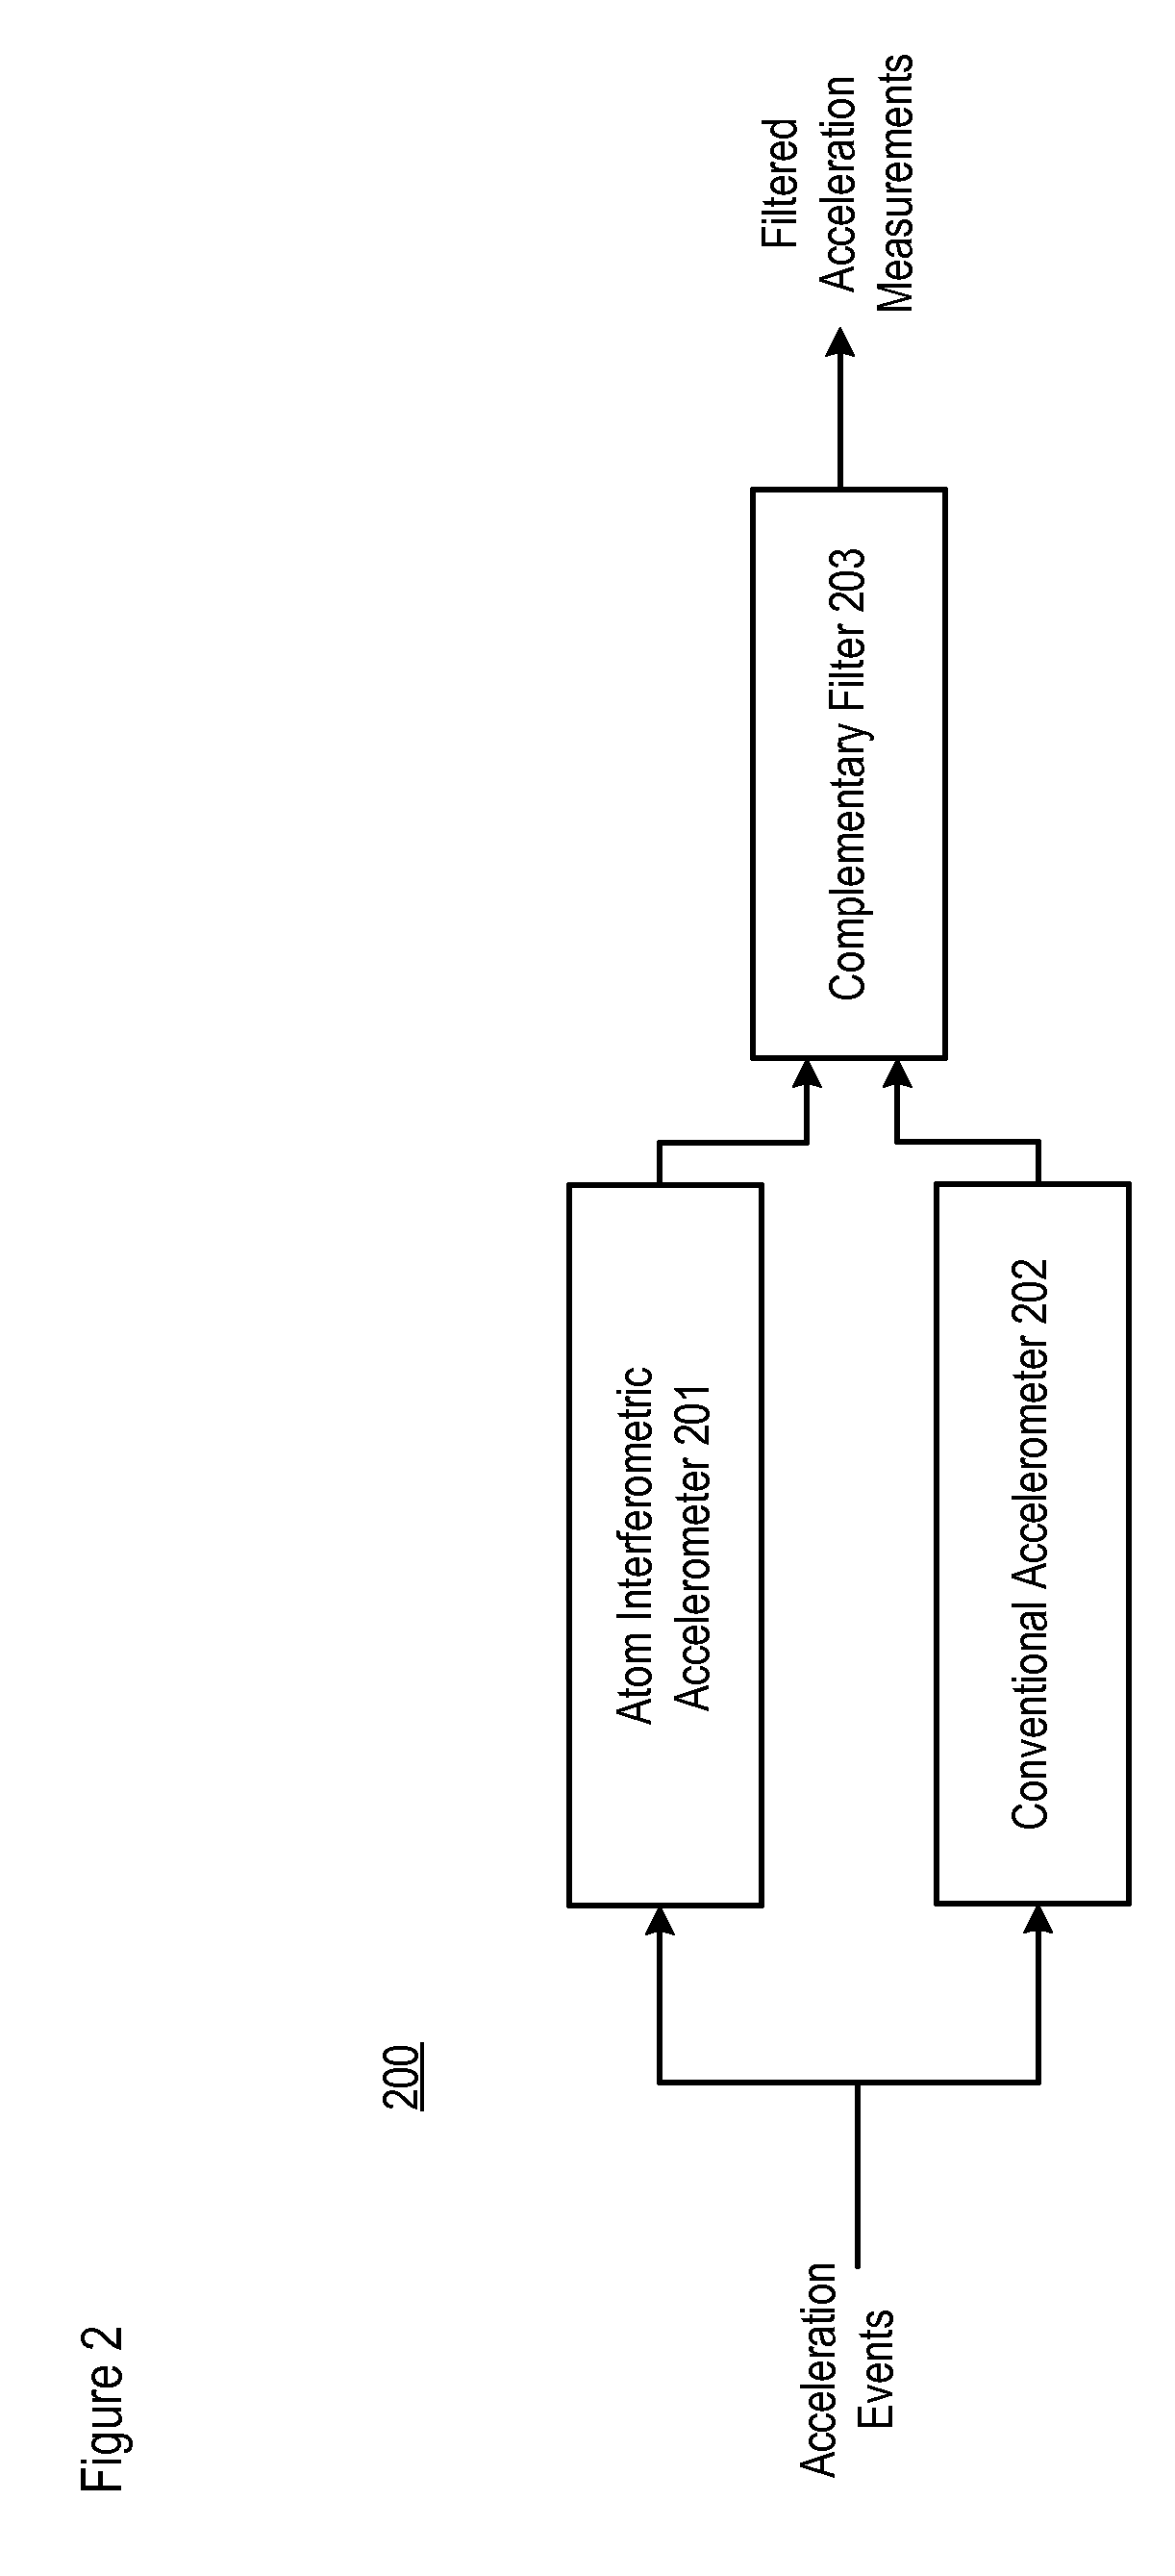 Performance of an atom interferometric device through complementary filtering